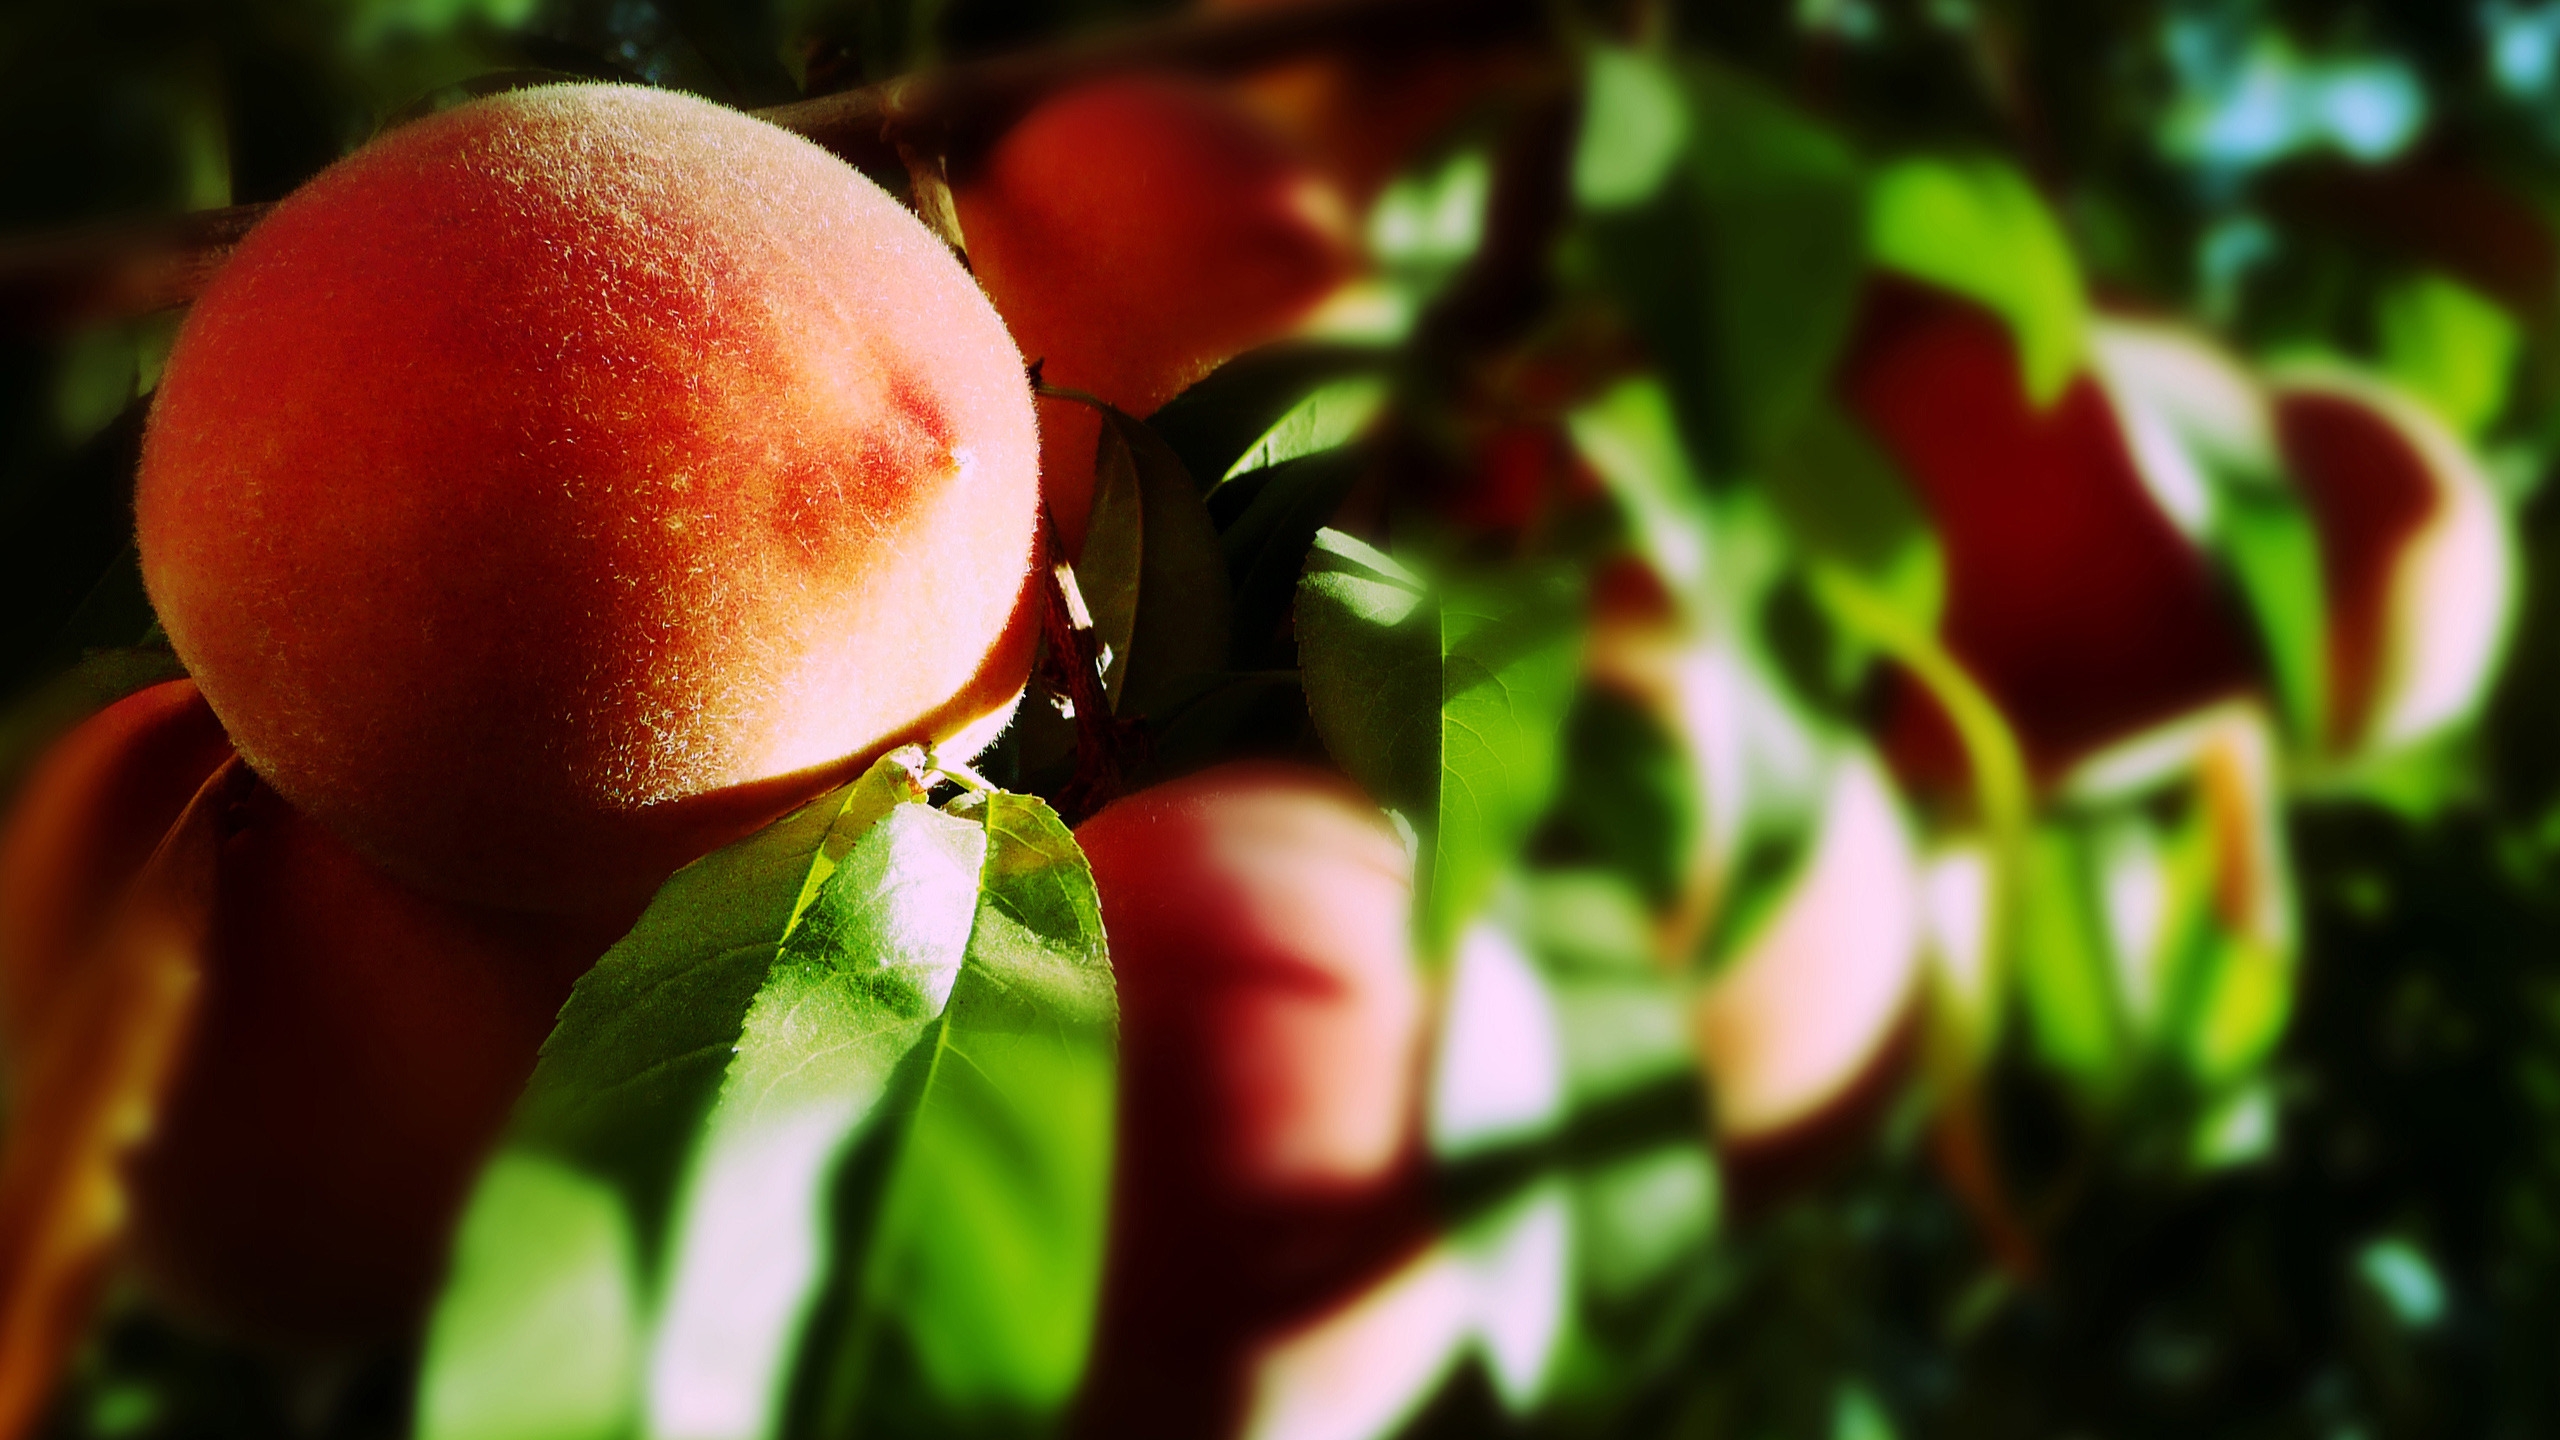 Blurry Peaches for 2560x1440 HDTV resolution